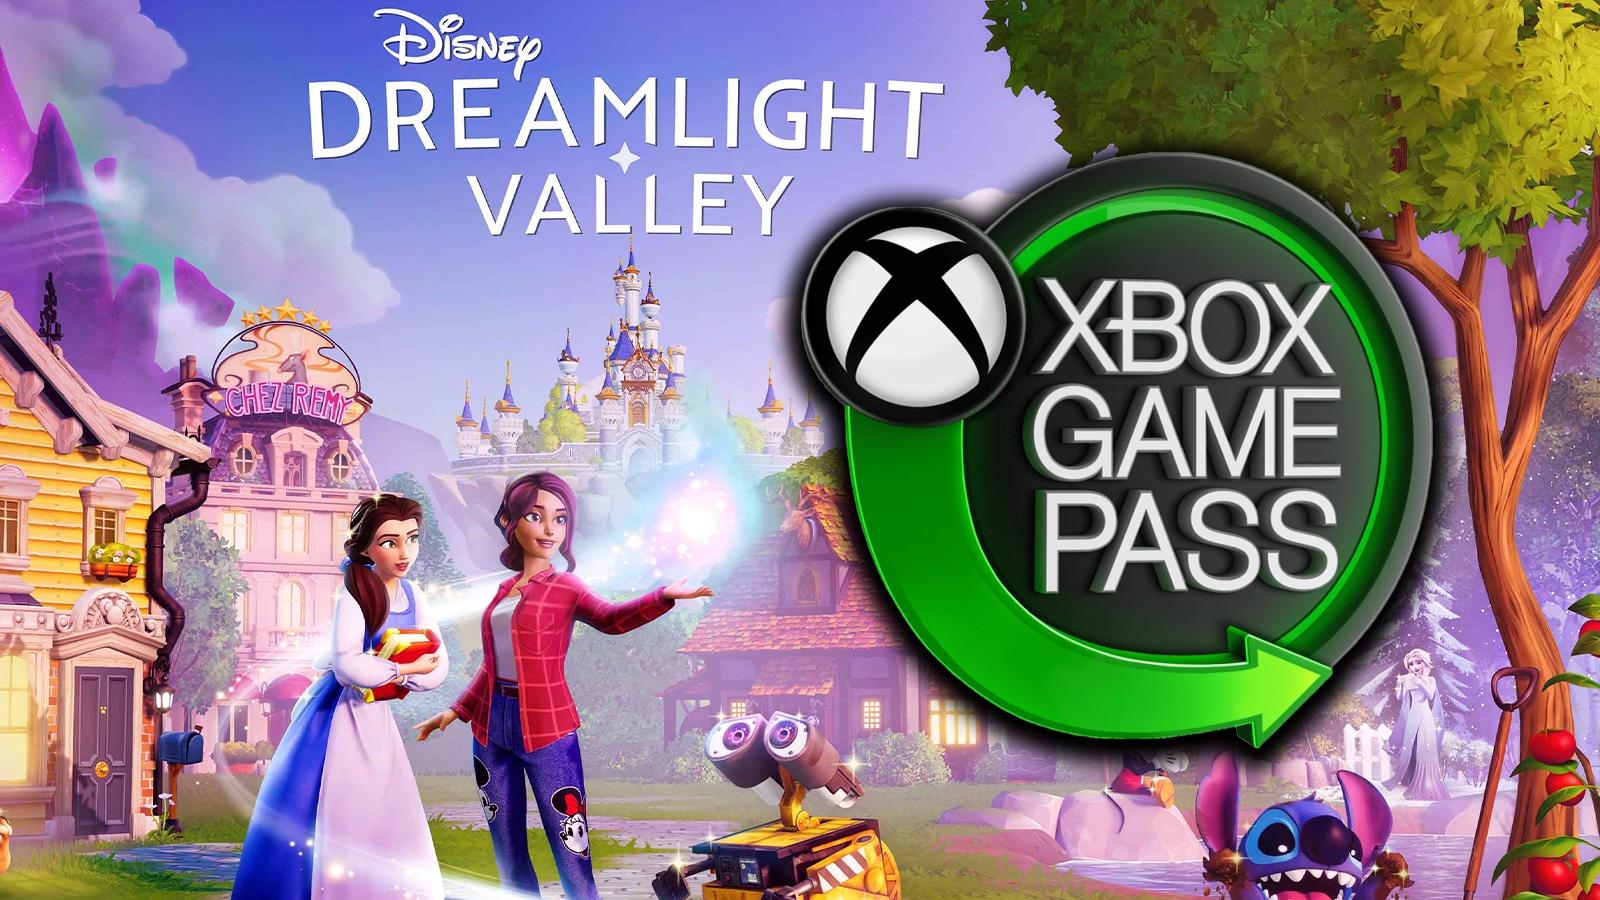 Disney Dreamlight Valley availability on Xbox Game Pass